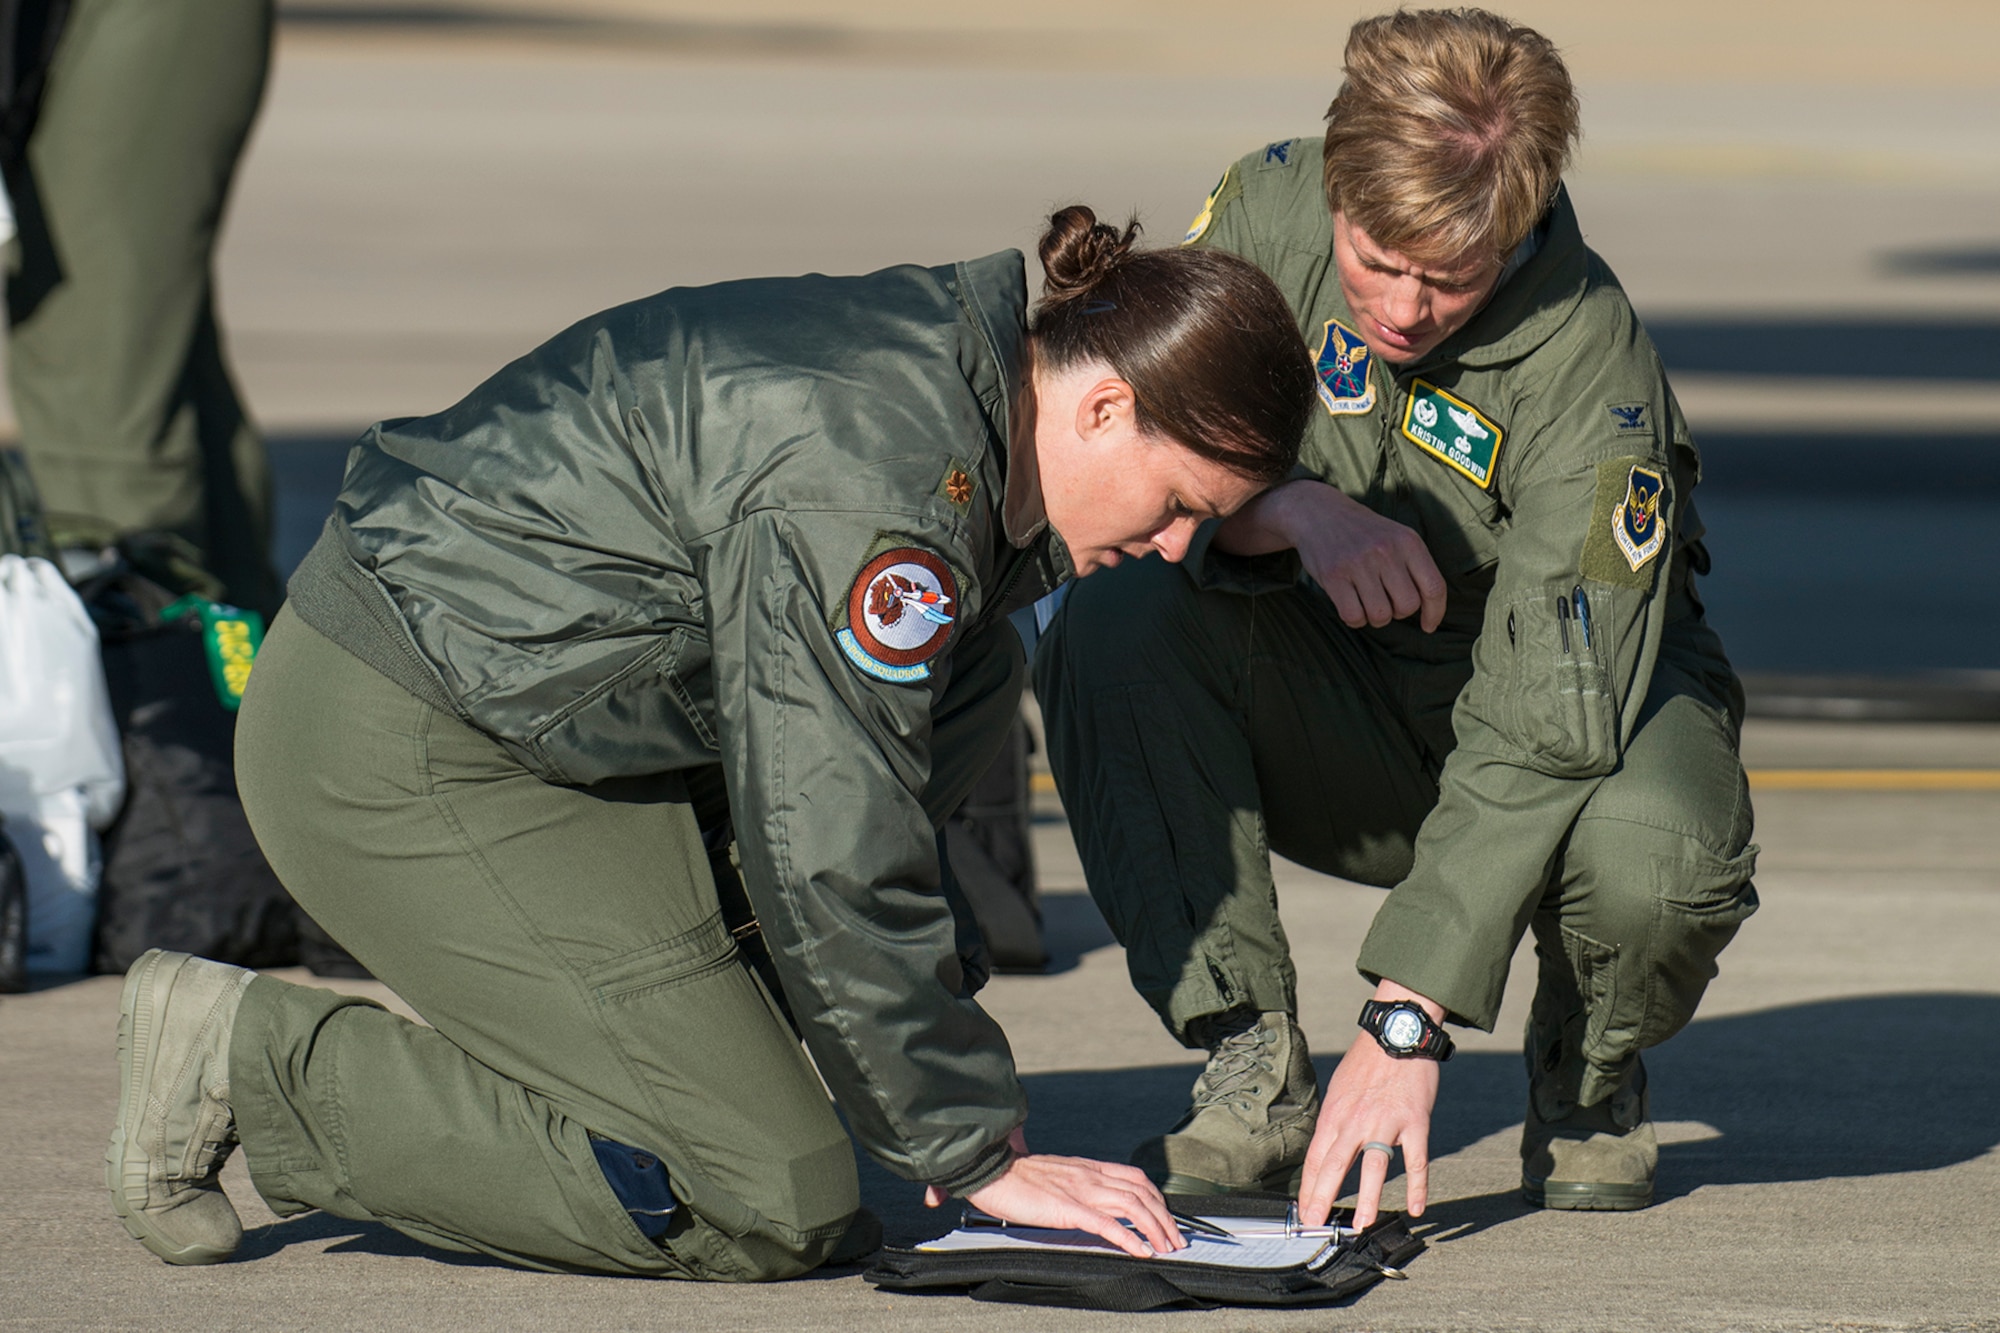 U.S. Air Force Maj. Heather Decker, of the 93rd Bomb Squadron, and Col. Kristin Goodwin, commander of the 2nd Bomb Wing, look over aircraft forms prior to a mission on Mar. 22, 2013, Barksdale Air Force Base, La. In recognition of Women’s History Month, the mission consisted of two B-52H Stratofortress bombers flown by two all-female aircrews made up from members of the Air Force Reserve Command’s 93rd and 343rd Bomb Squadrons and the 2nd Bomb Wing’s 11th, 20th and 96th Bomb Squadrons. (U.S. Air Force photo by Master Sgt. Greg Steele/Released)